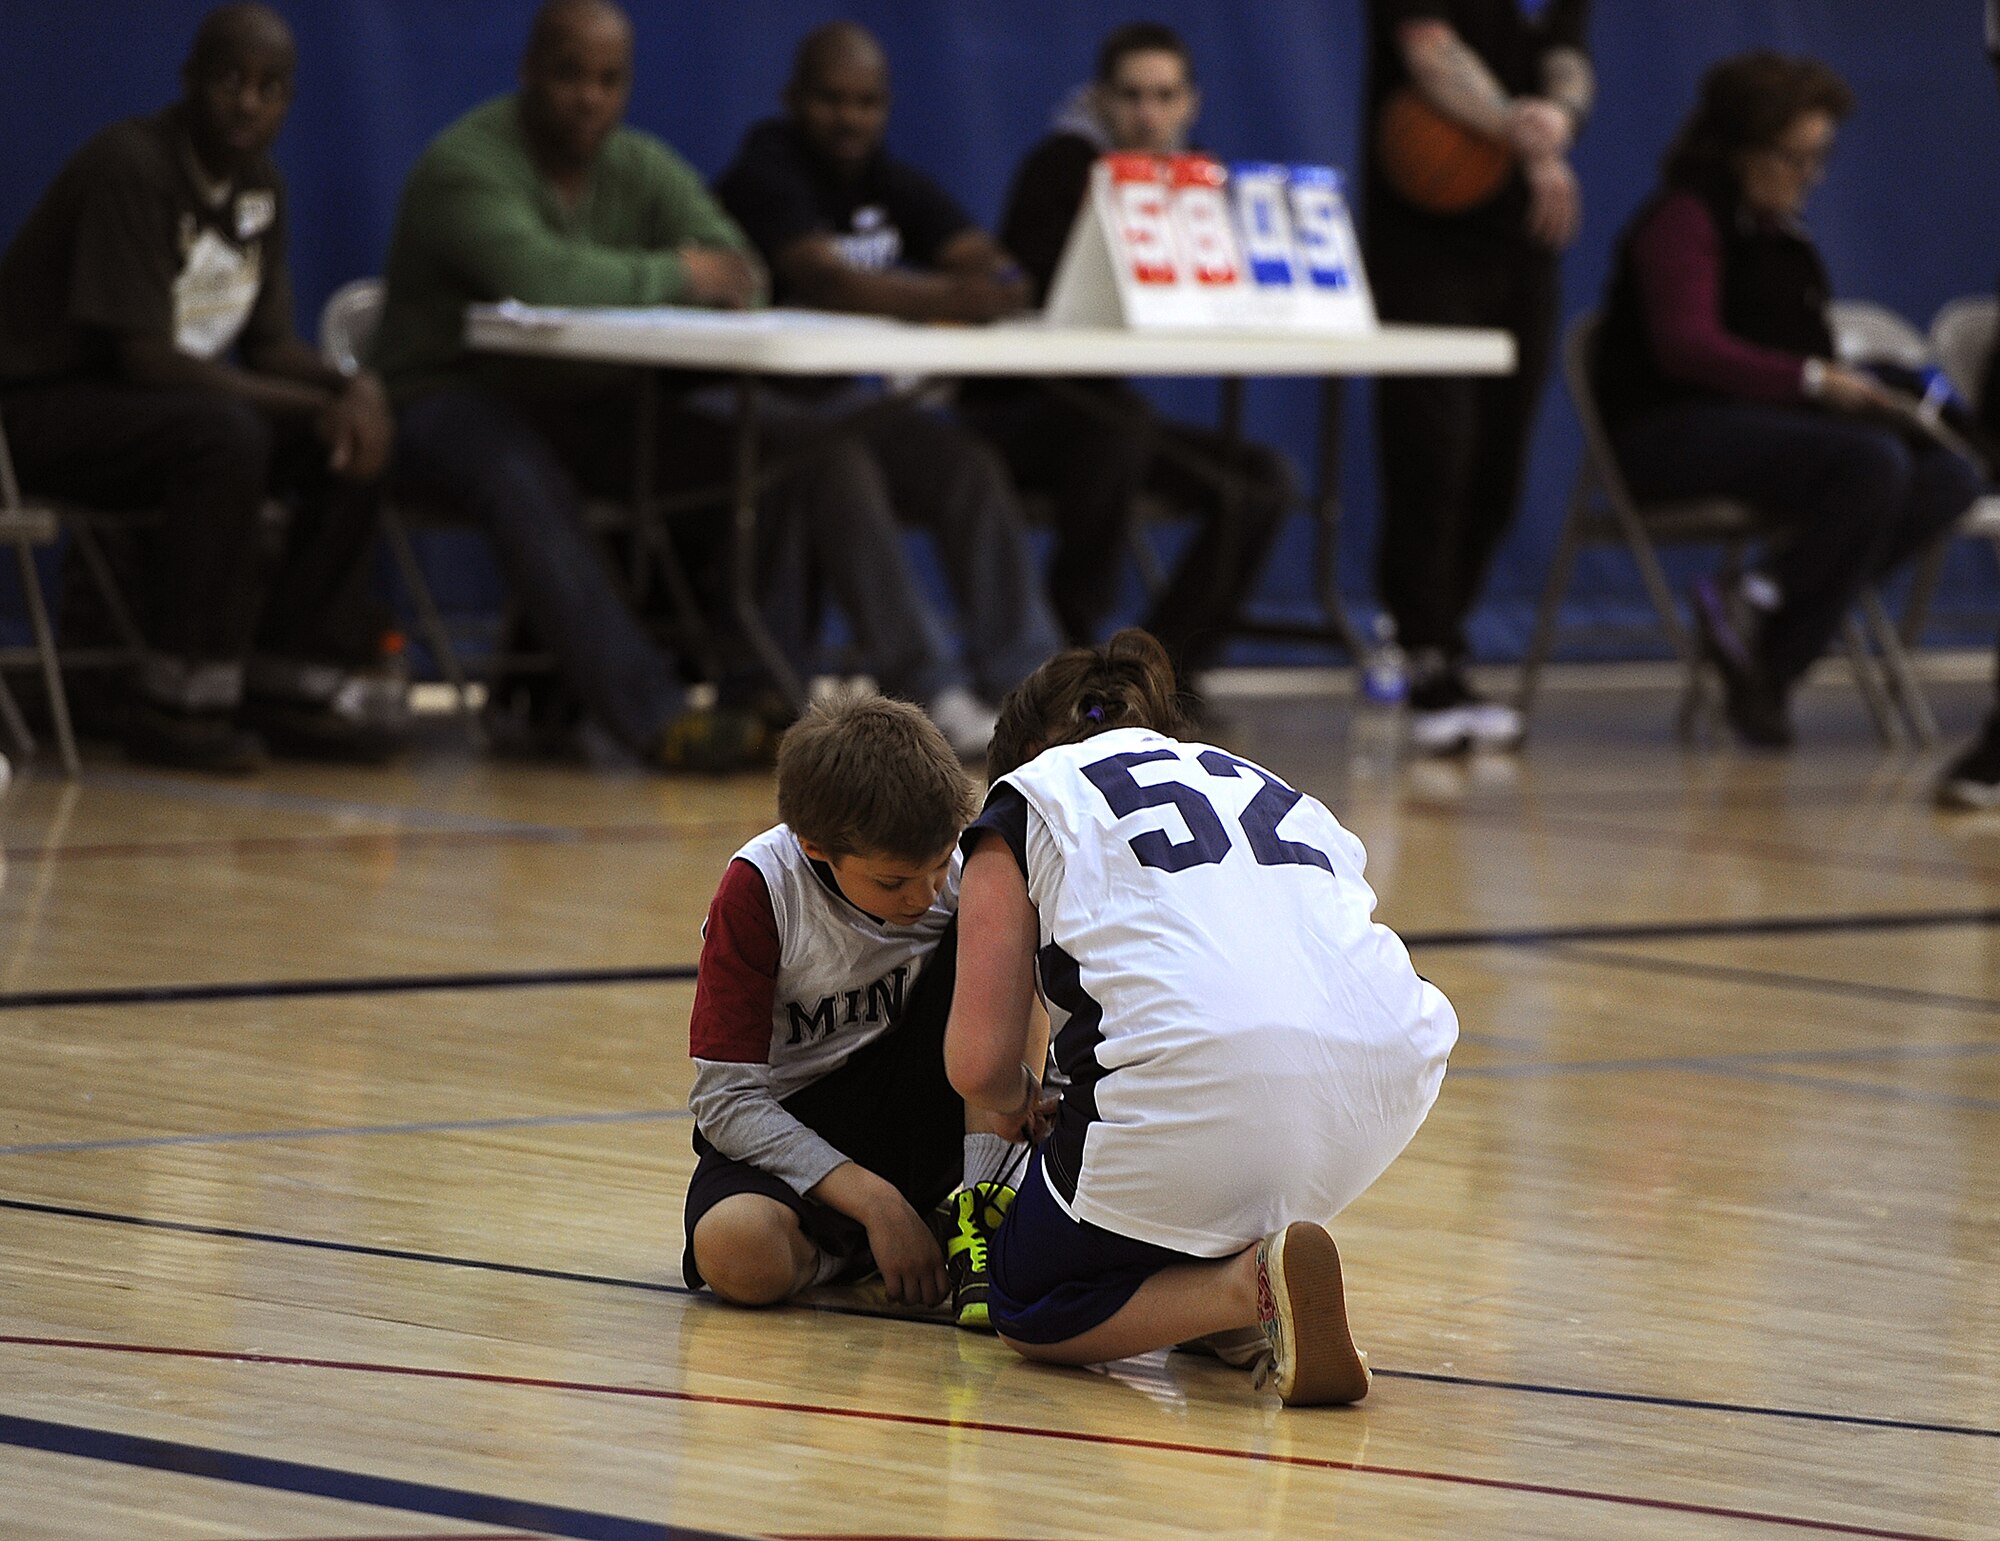 MINOT AIR FORCE BASE, N.D. -- A Special Olympics athlete helps a teammate tie his shoe during the regional basketball tournament at the McAdoo Fitness Center on Minot Air Force Base, N.D., Feb. 21, 2015. The tournament was a stepping stone to the state-level competition, which will be held next month in downtown Minot. (U.S. Air Force photo/Senior Airman Kristoffer Kaubisch)